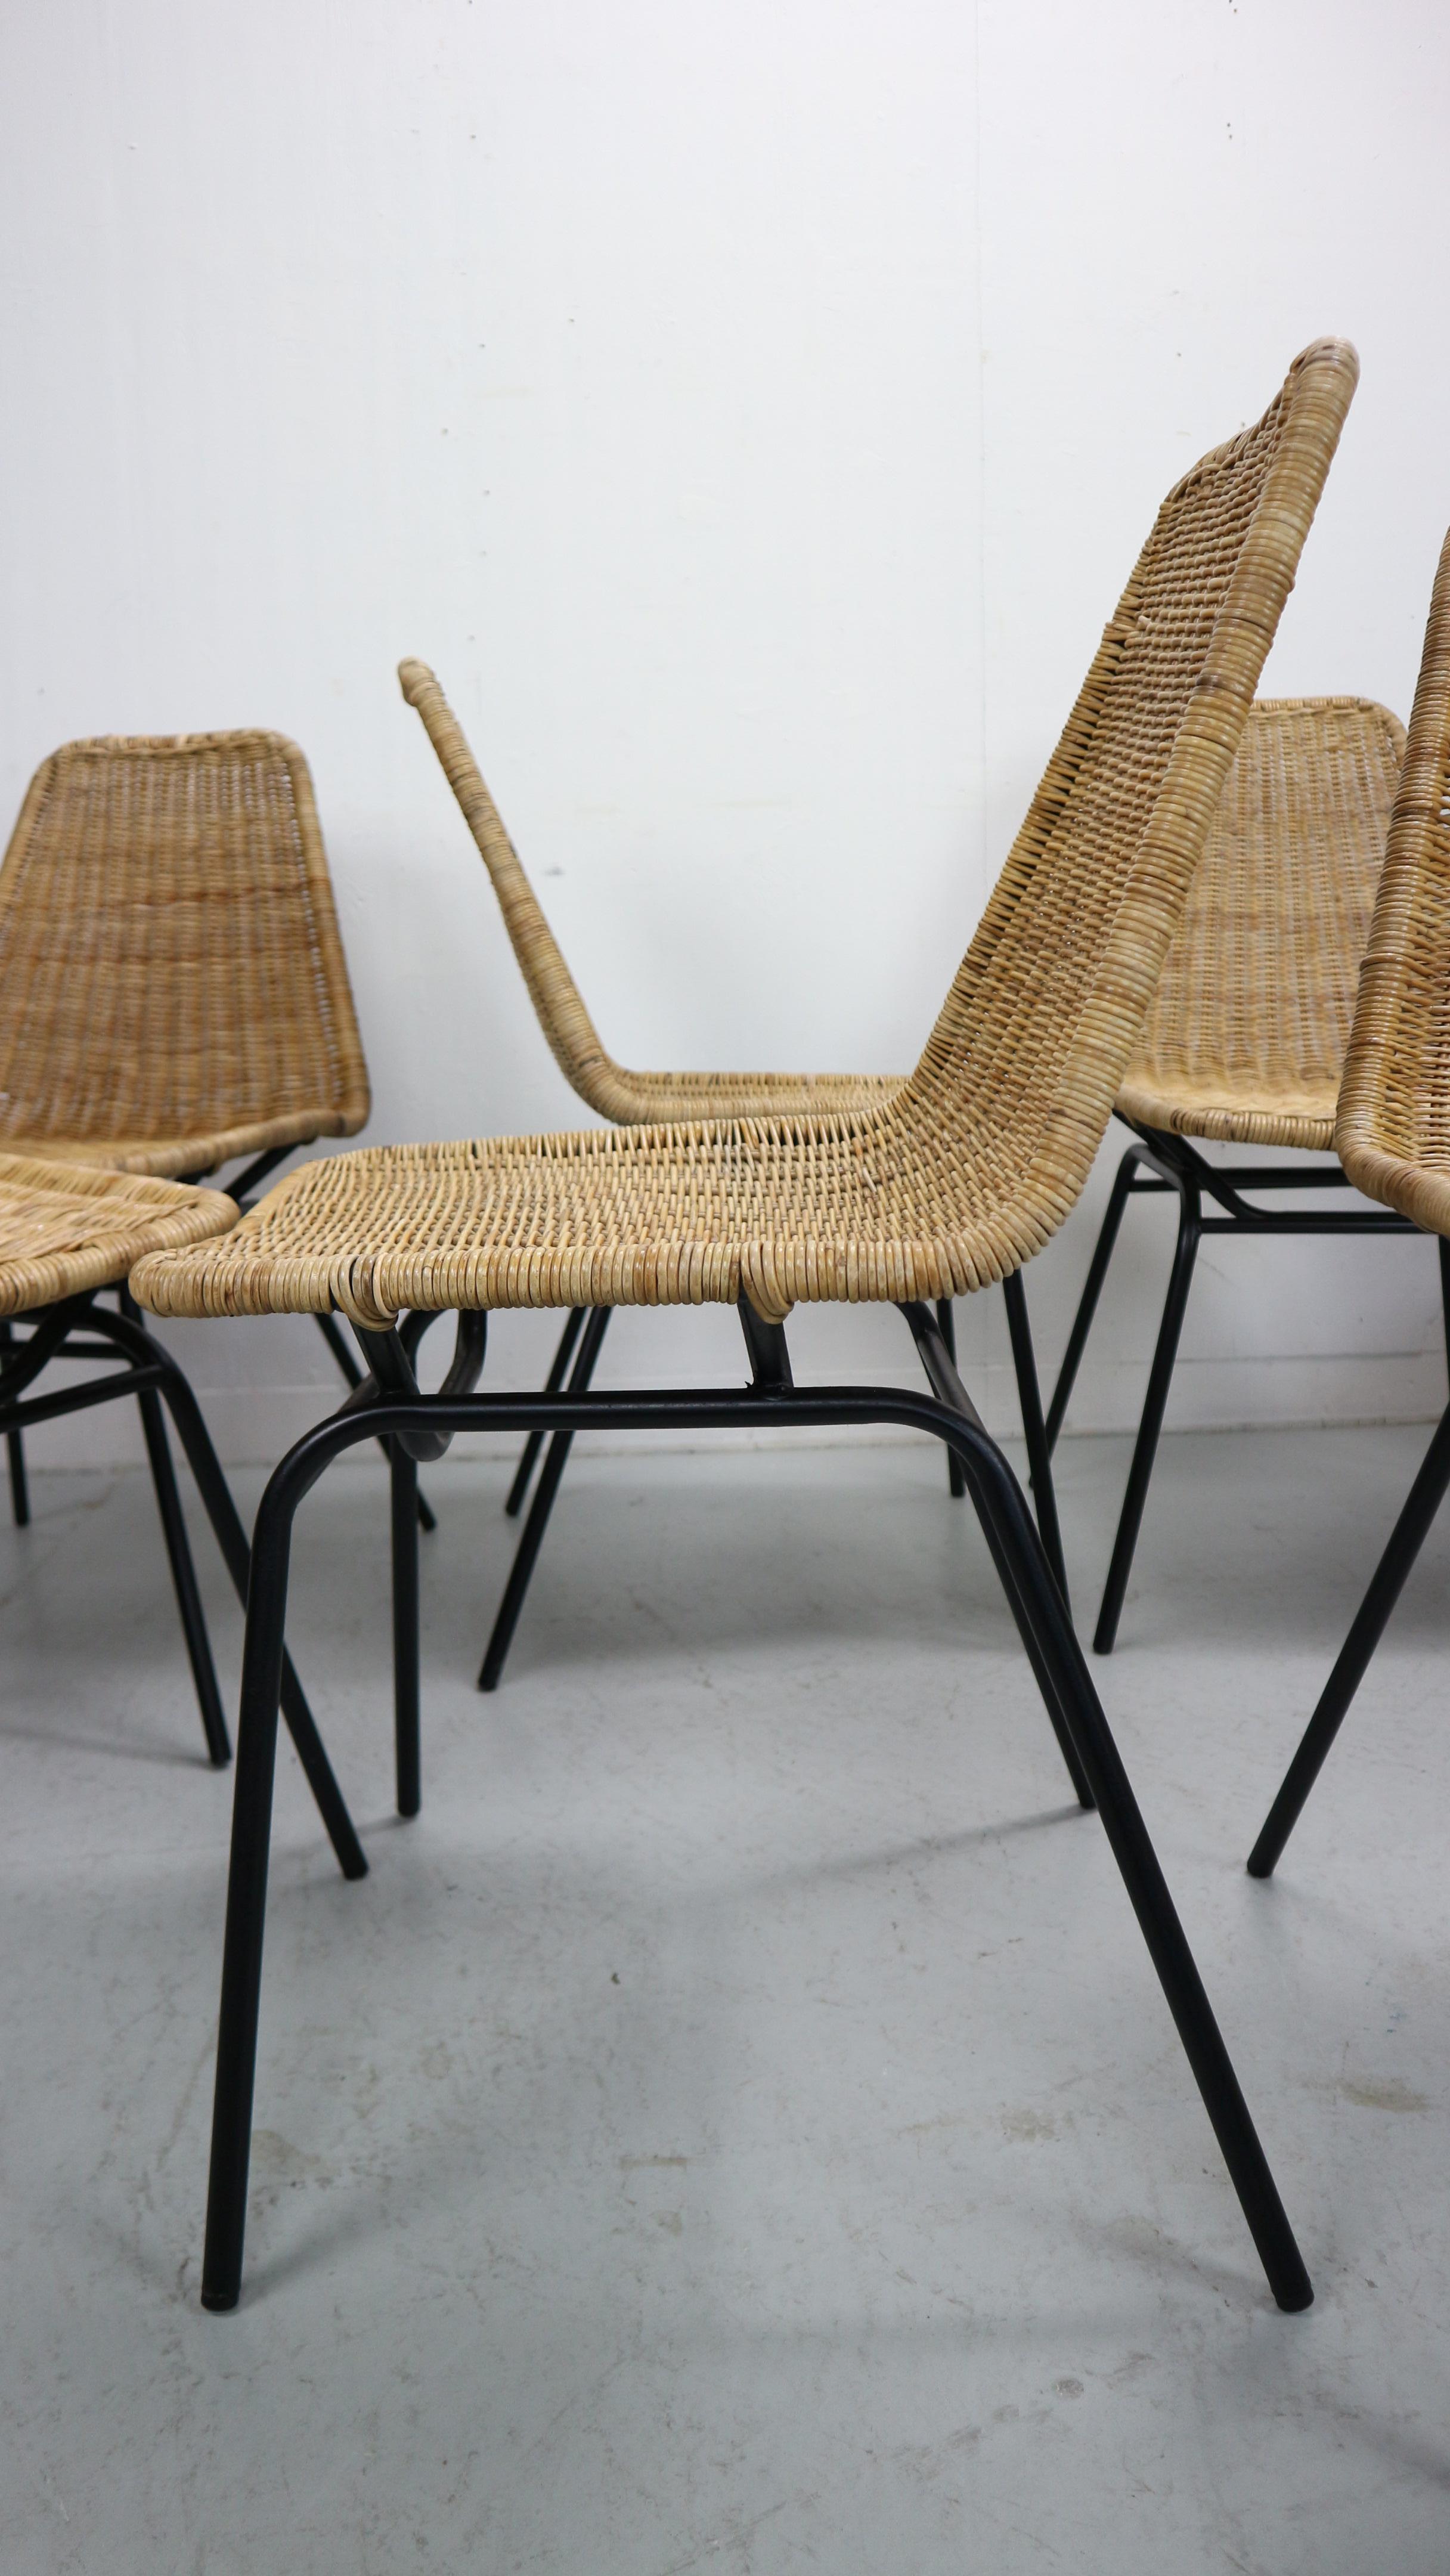 set of 8 wicker chairs model 'italia 100' from the 1960s, Netherlands For Sale 2